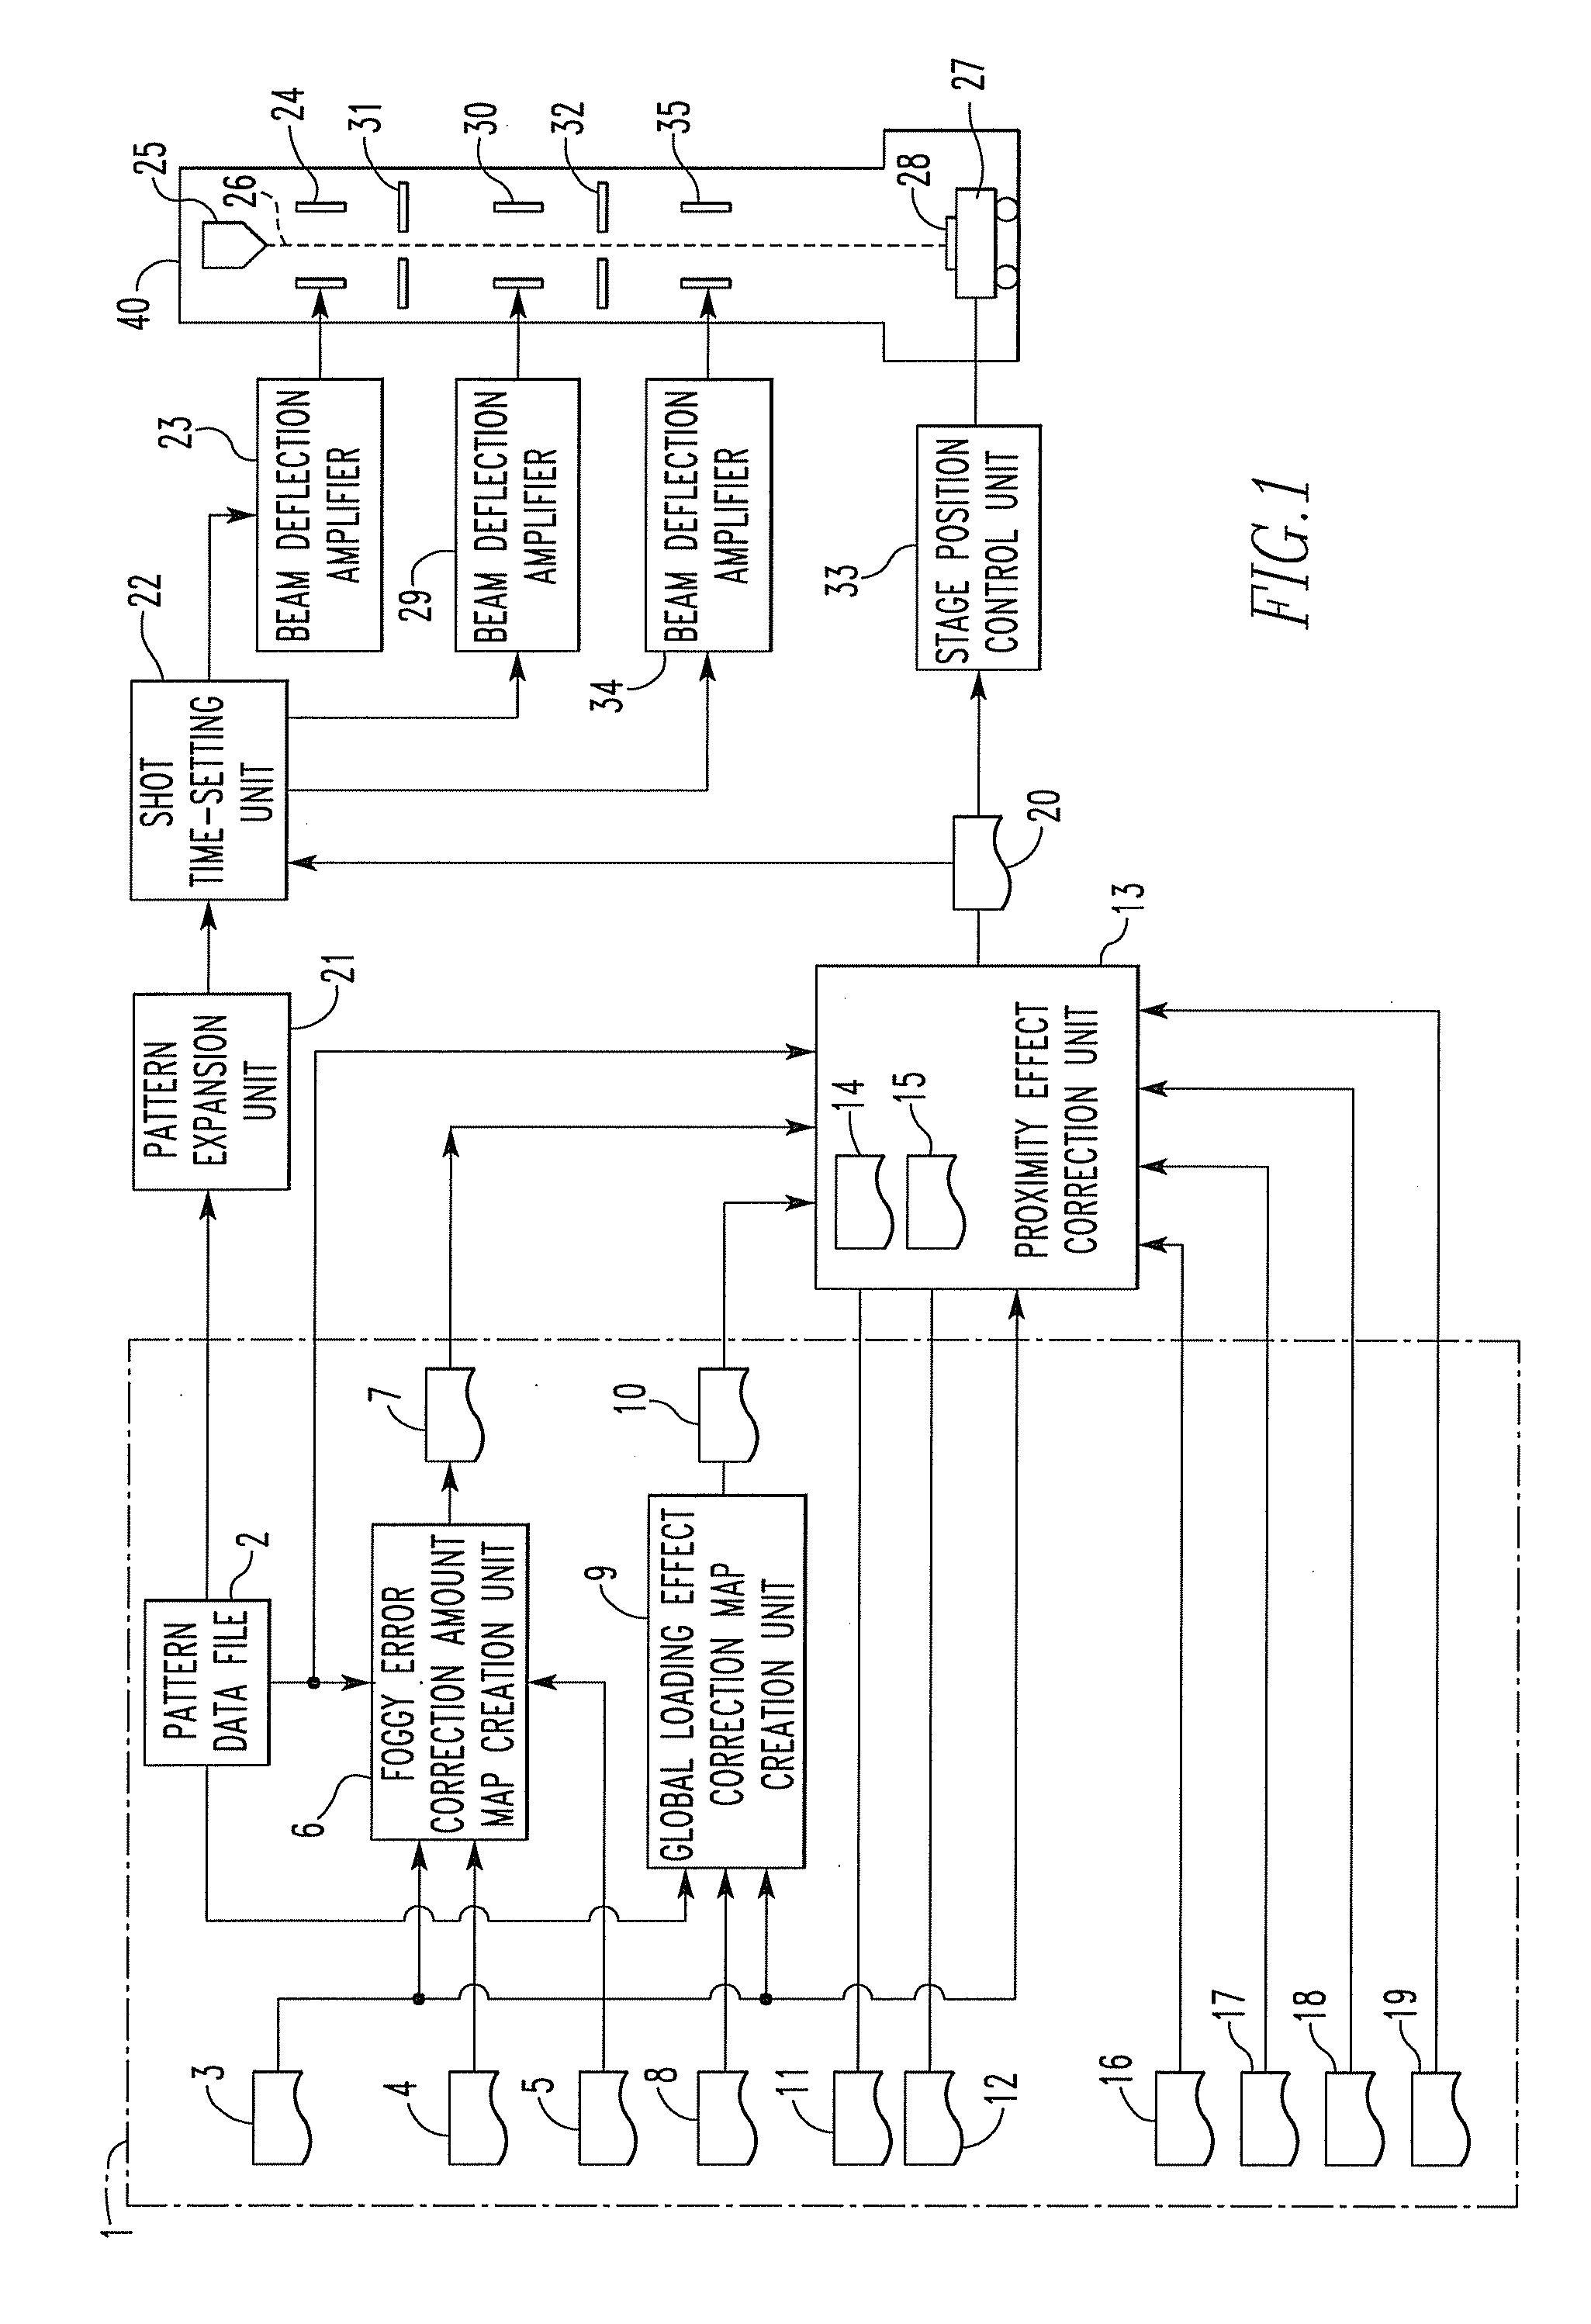 Method and System for Charged-Particle Beam Lithography